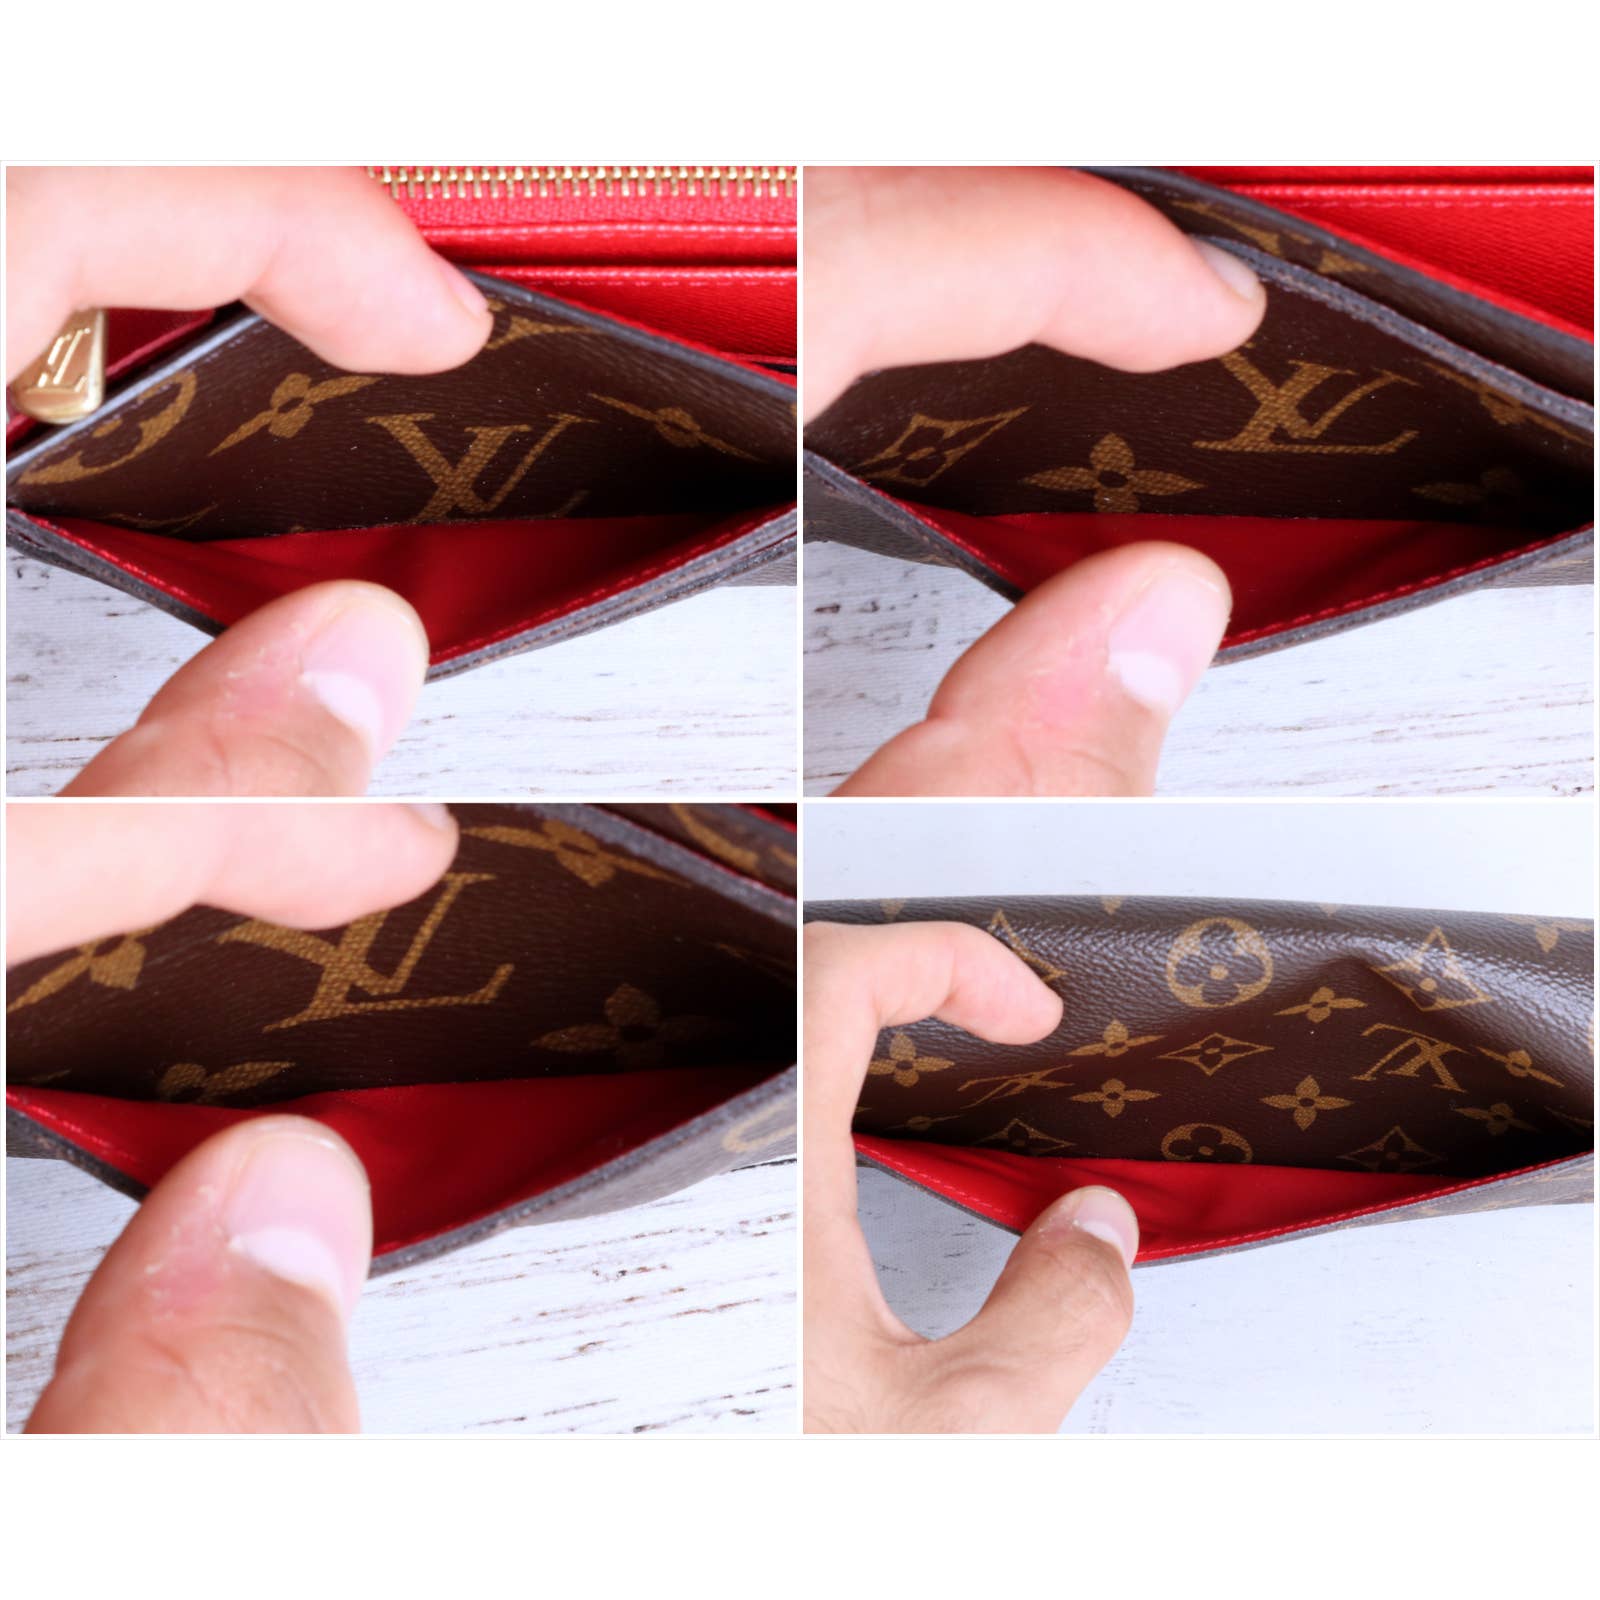 Louis Vuitton Sarah wallet in red monogram leather, RvceShops Revival